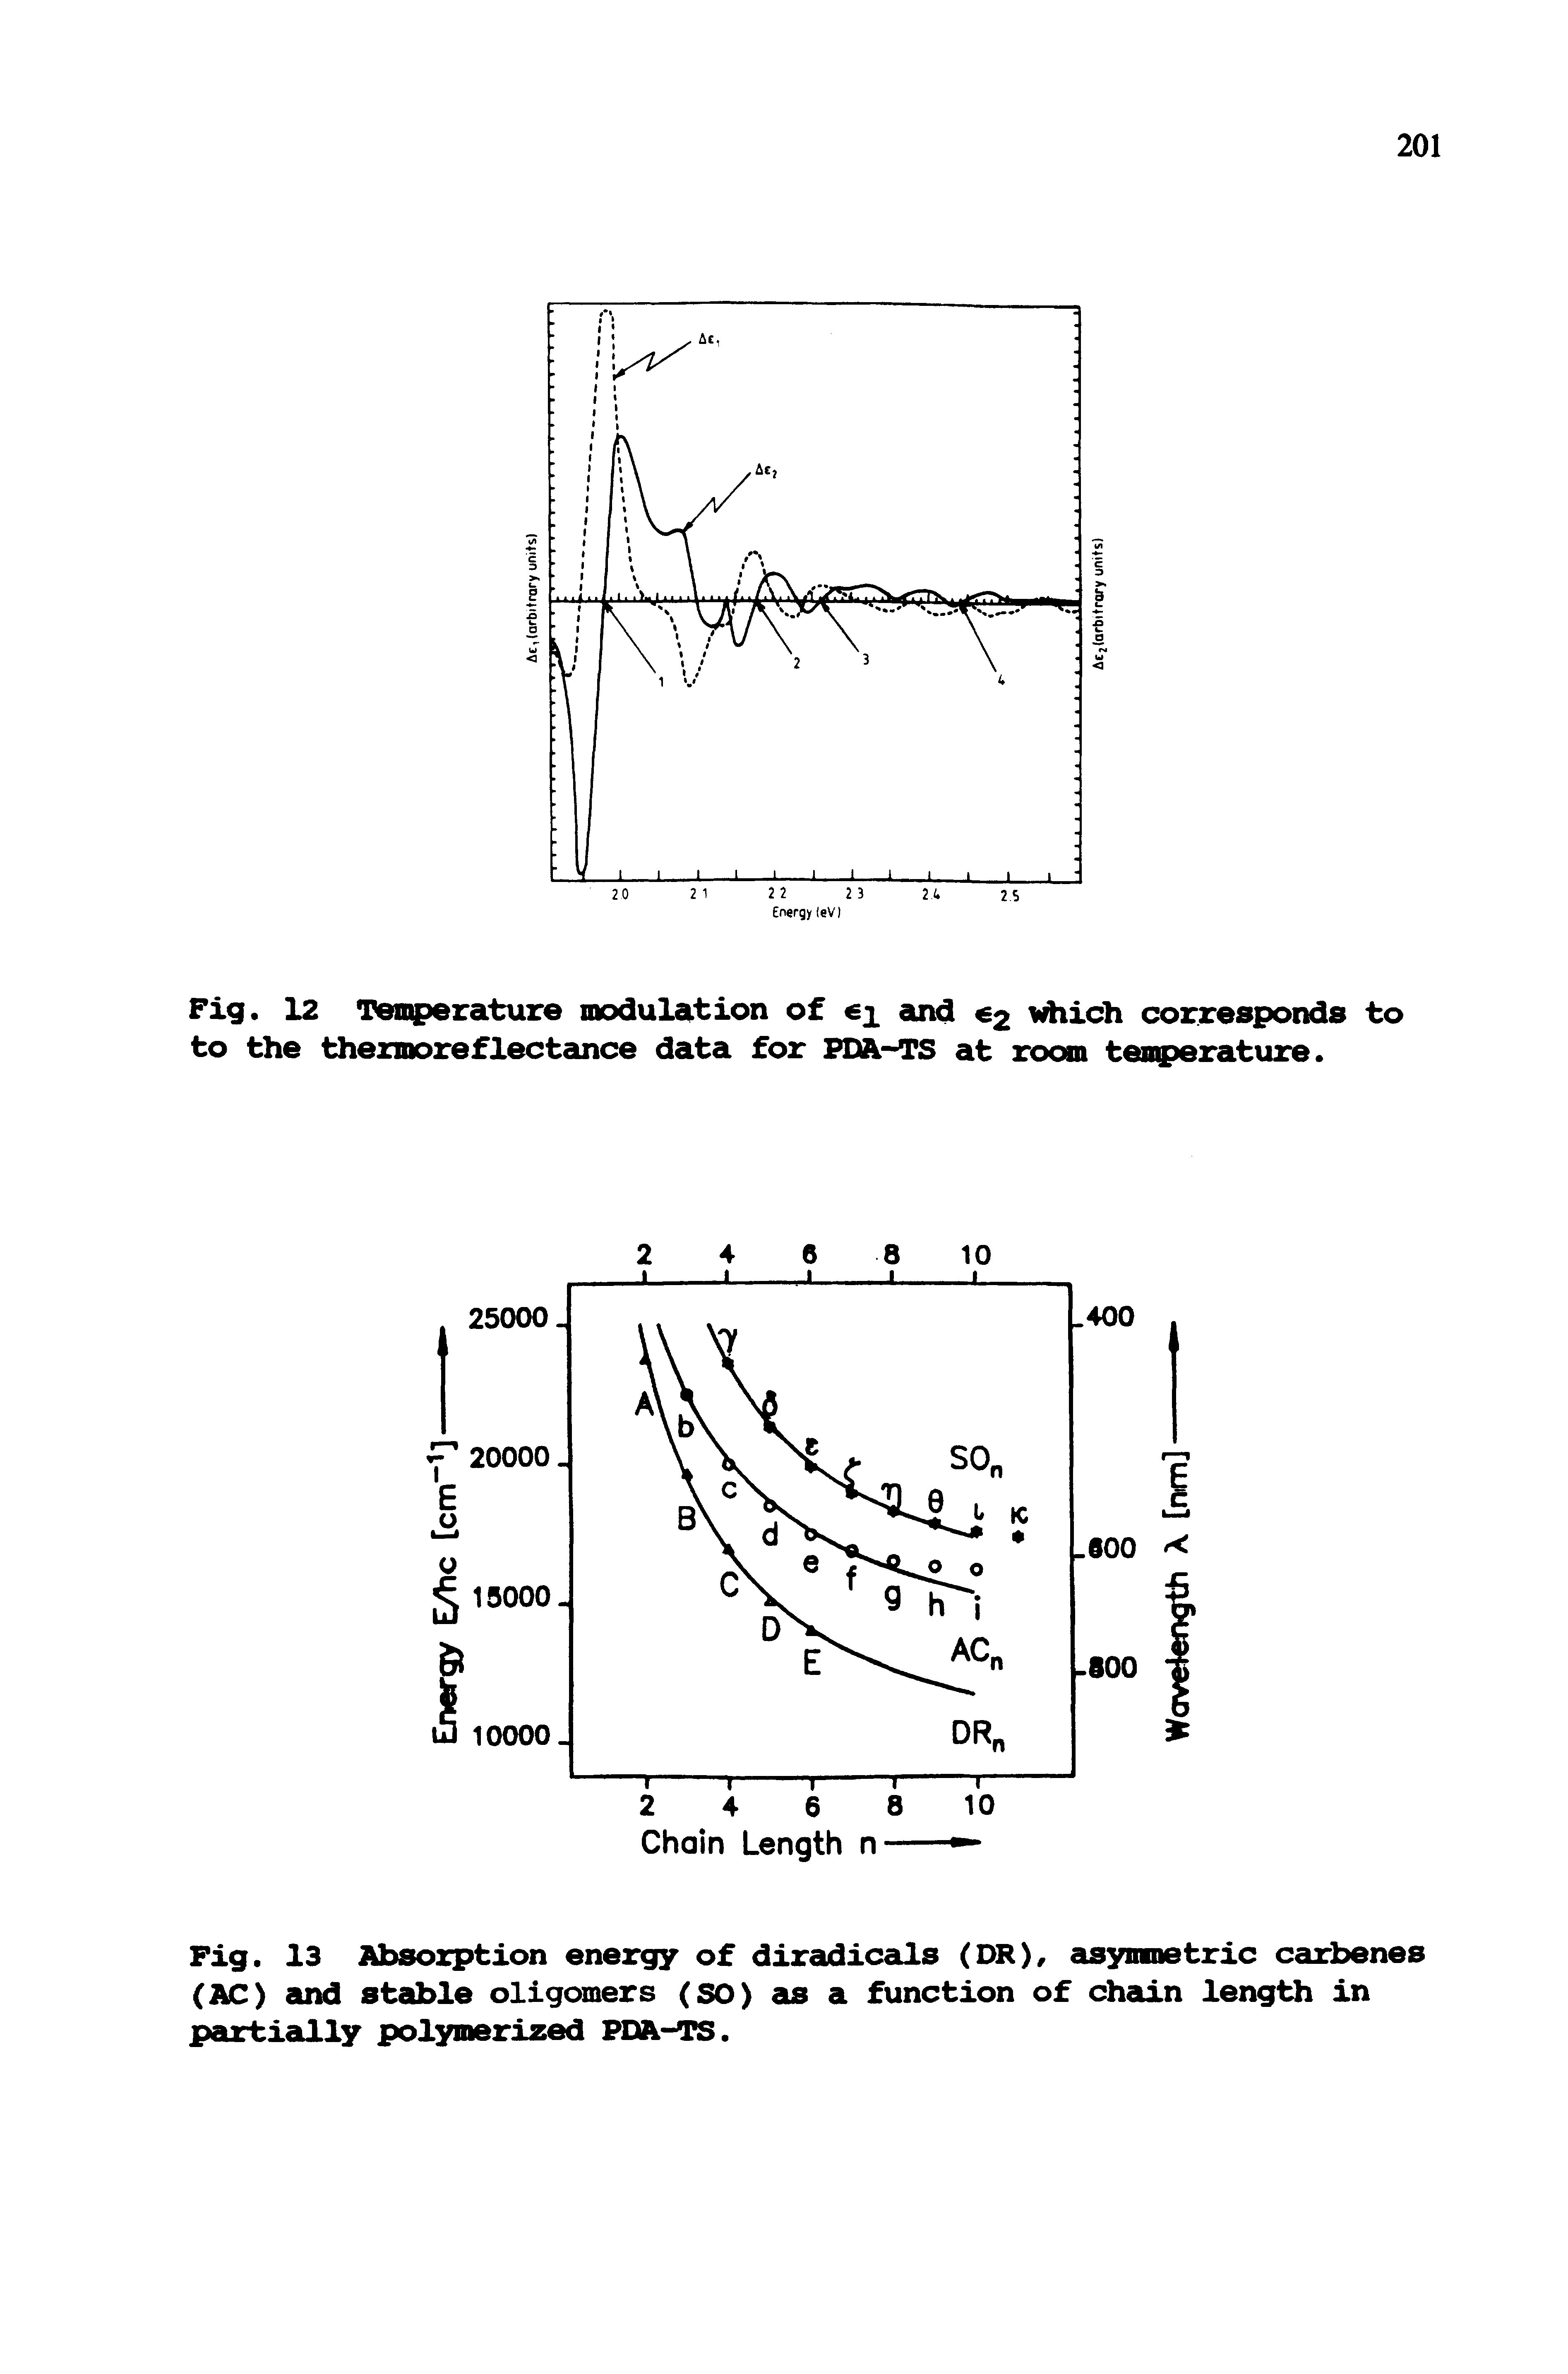 Fig. 13 Absorption energy of diradicals (DR), asymmetric carbenes (AC) and stable oligomers (SO) as a function of chun length in partially polymerized PDA-TS.